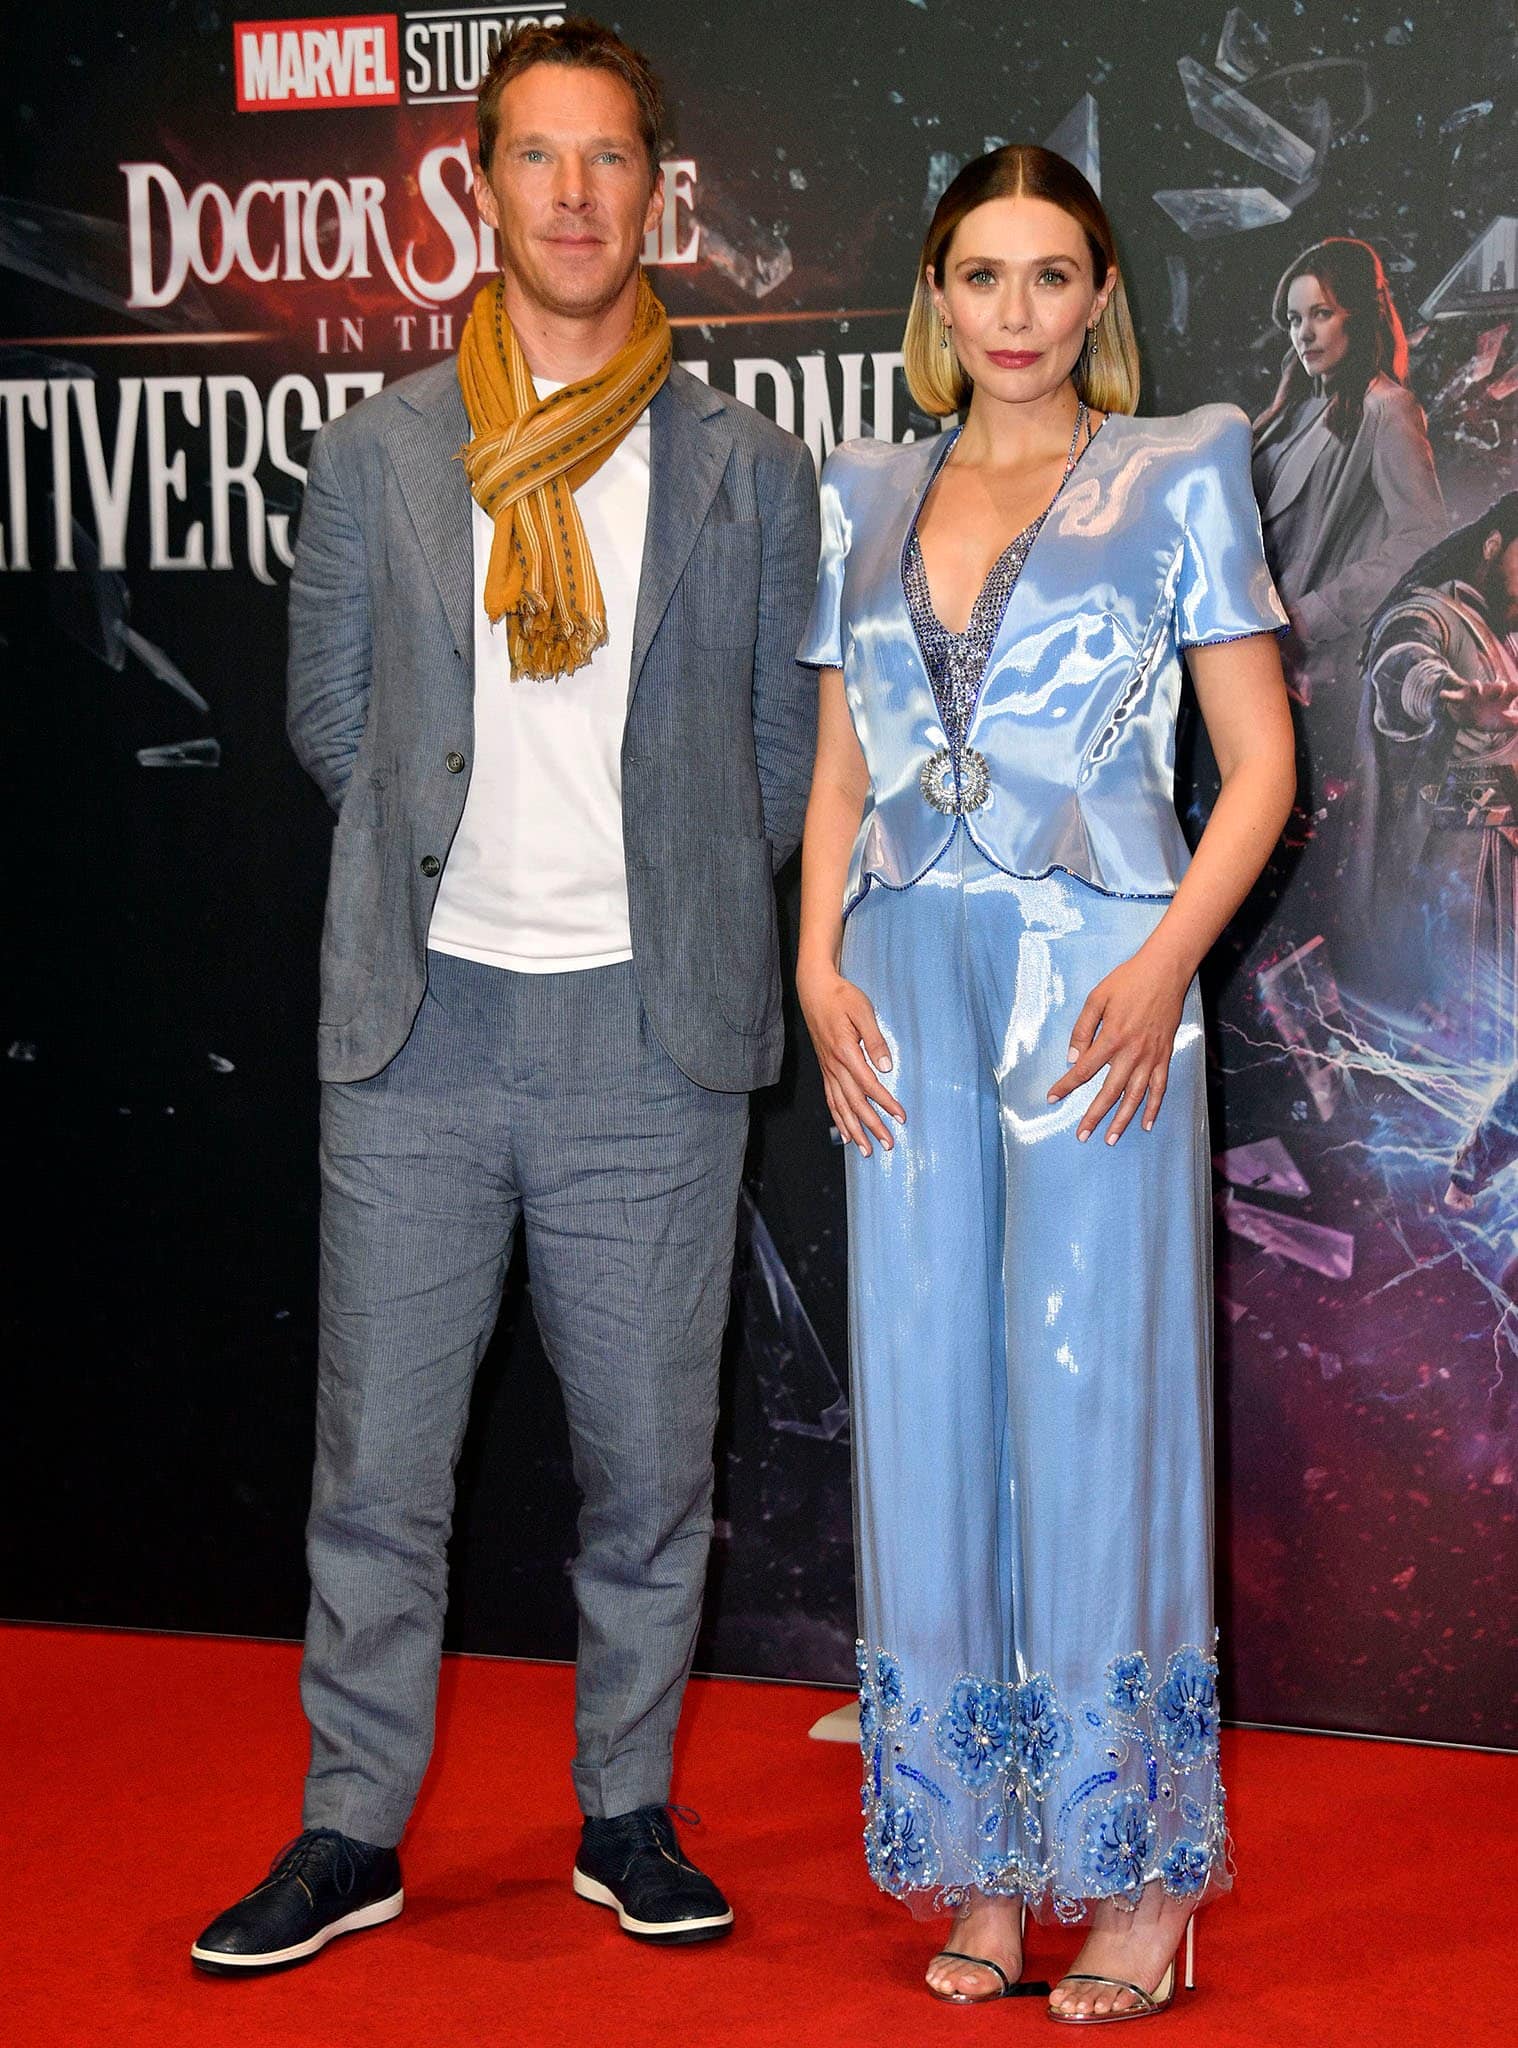 Benedict Cumberbatch and Elizabeth Olsen at the Doctor Strange in the Multiverse of Madness Berlin photocall on April 21, 2022